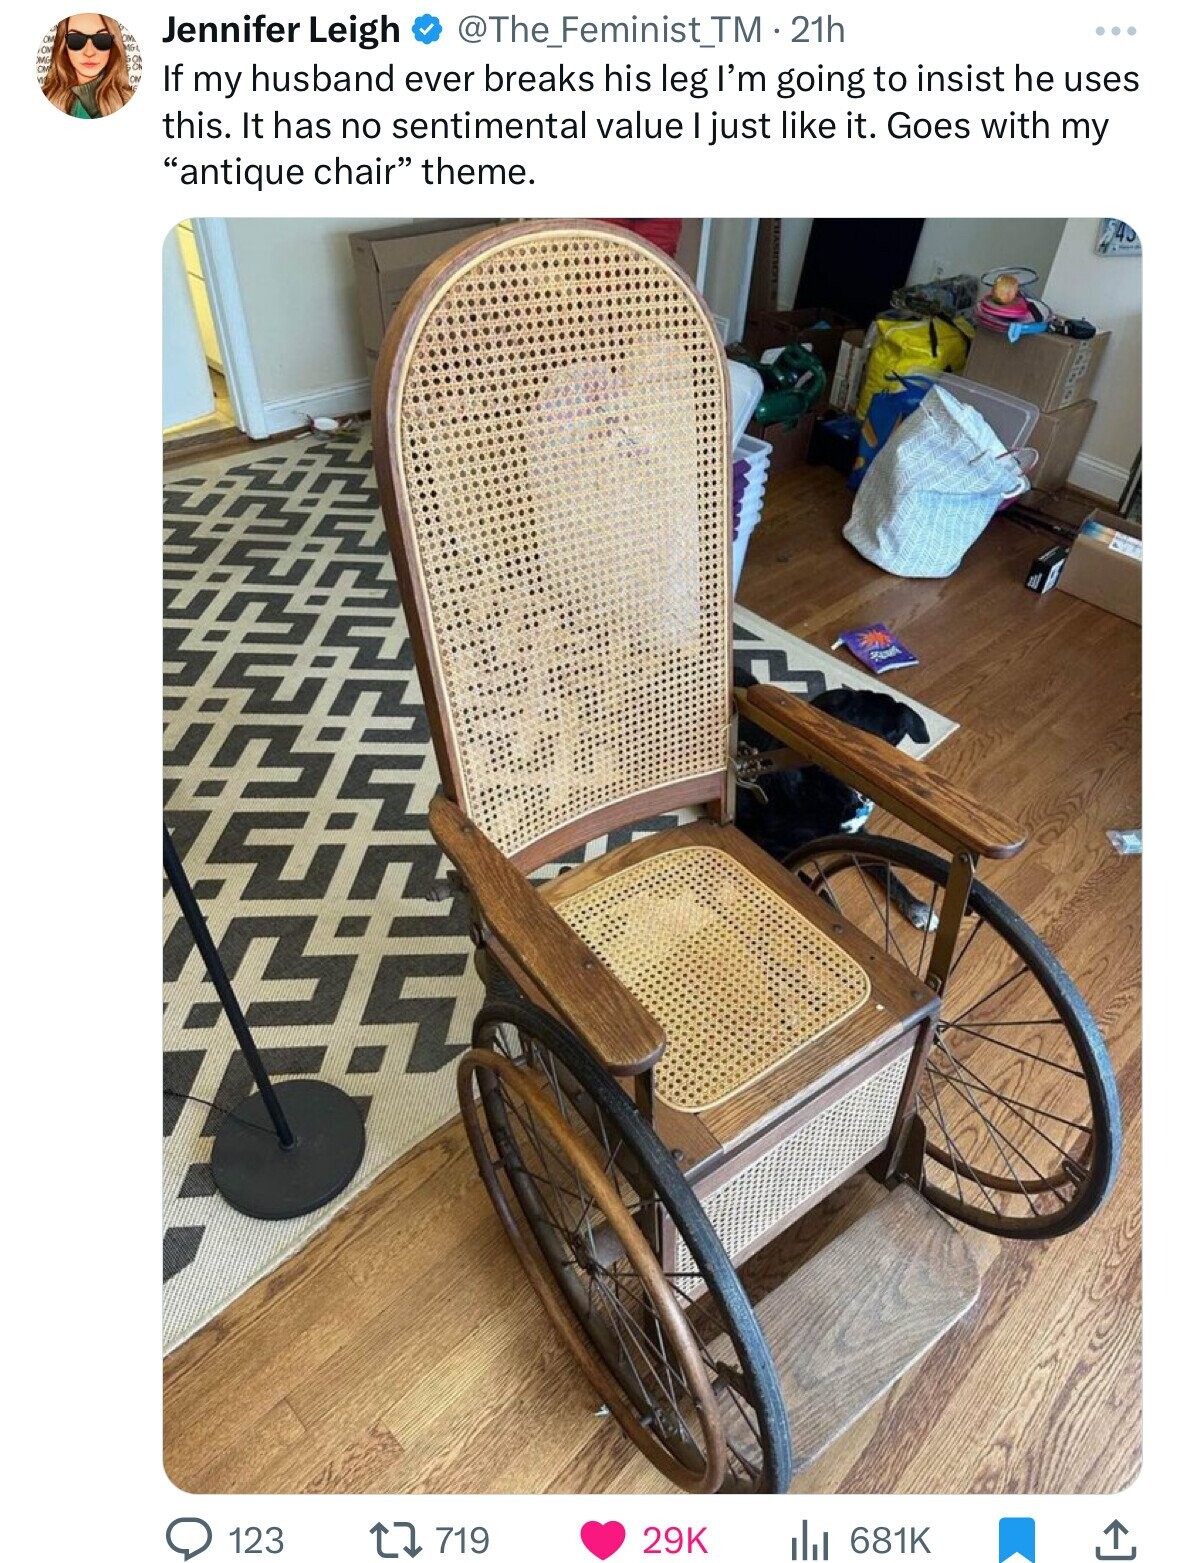 @The_Feminist_TM-2 21h Jennifer Leigh ON If my husband ever breaks his leg I'm going to insist he uses this. It has no sentimental value I just like it. Goes with my antique chair theme. 74 719 123 29K 681K 